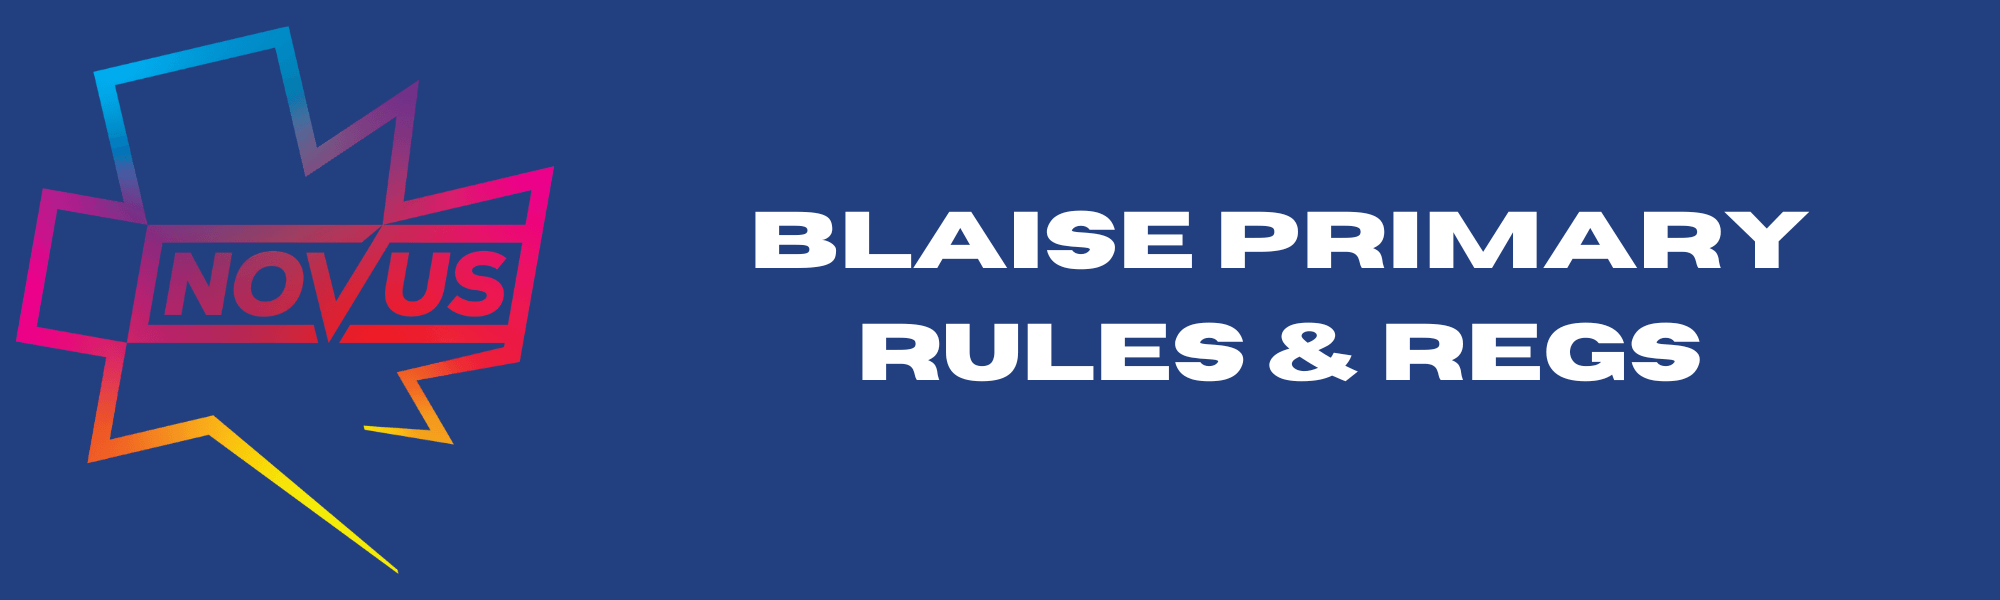 Blaise Rules and Regs Banner